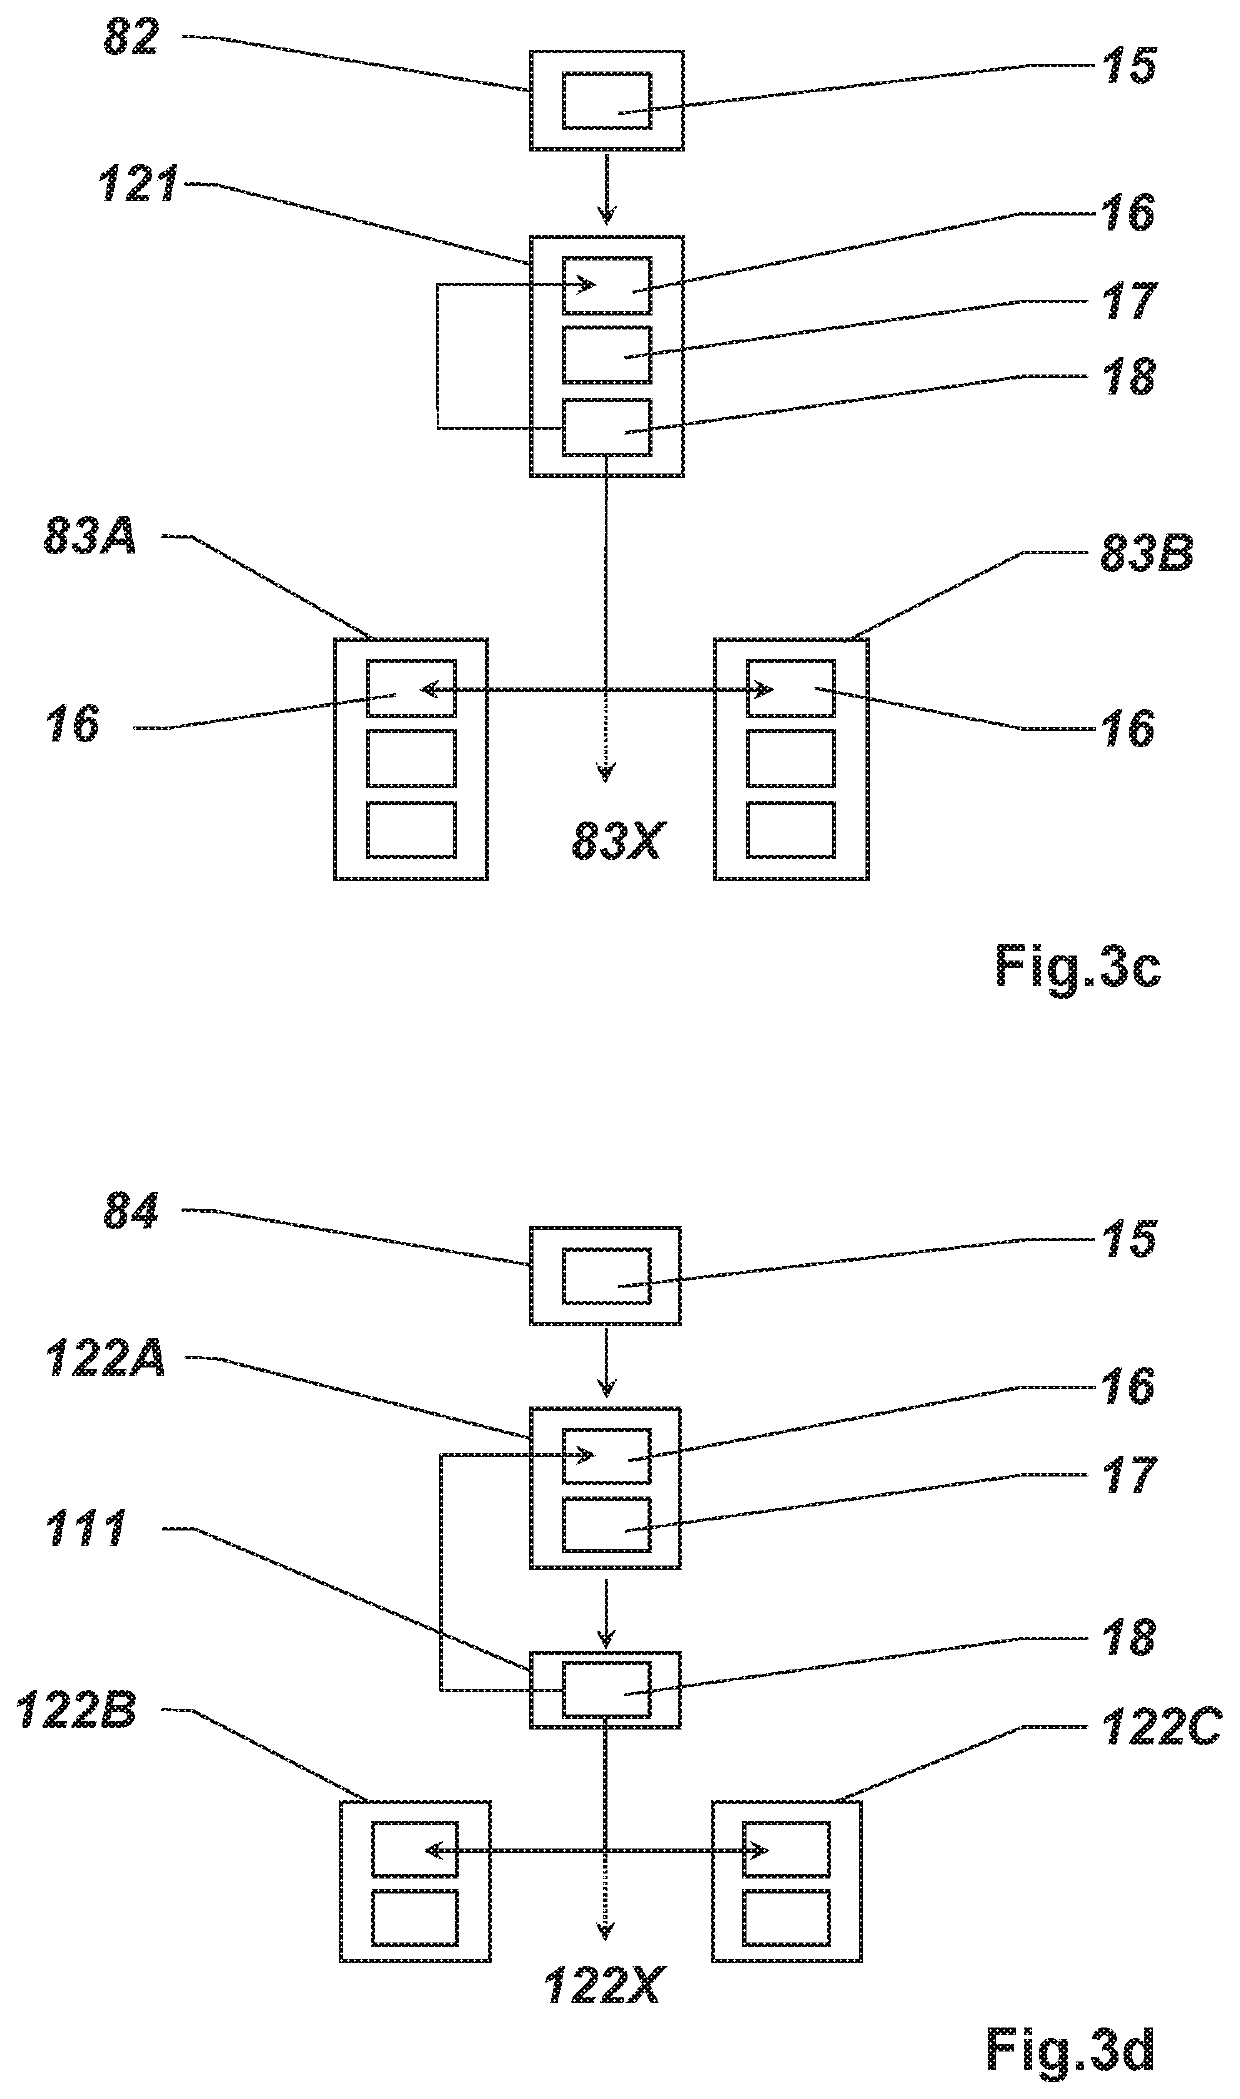 Method for assigning particular classes of interest within measurement data